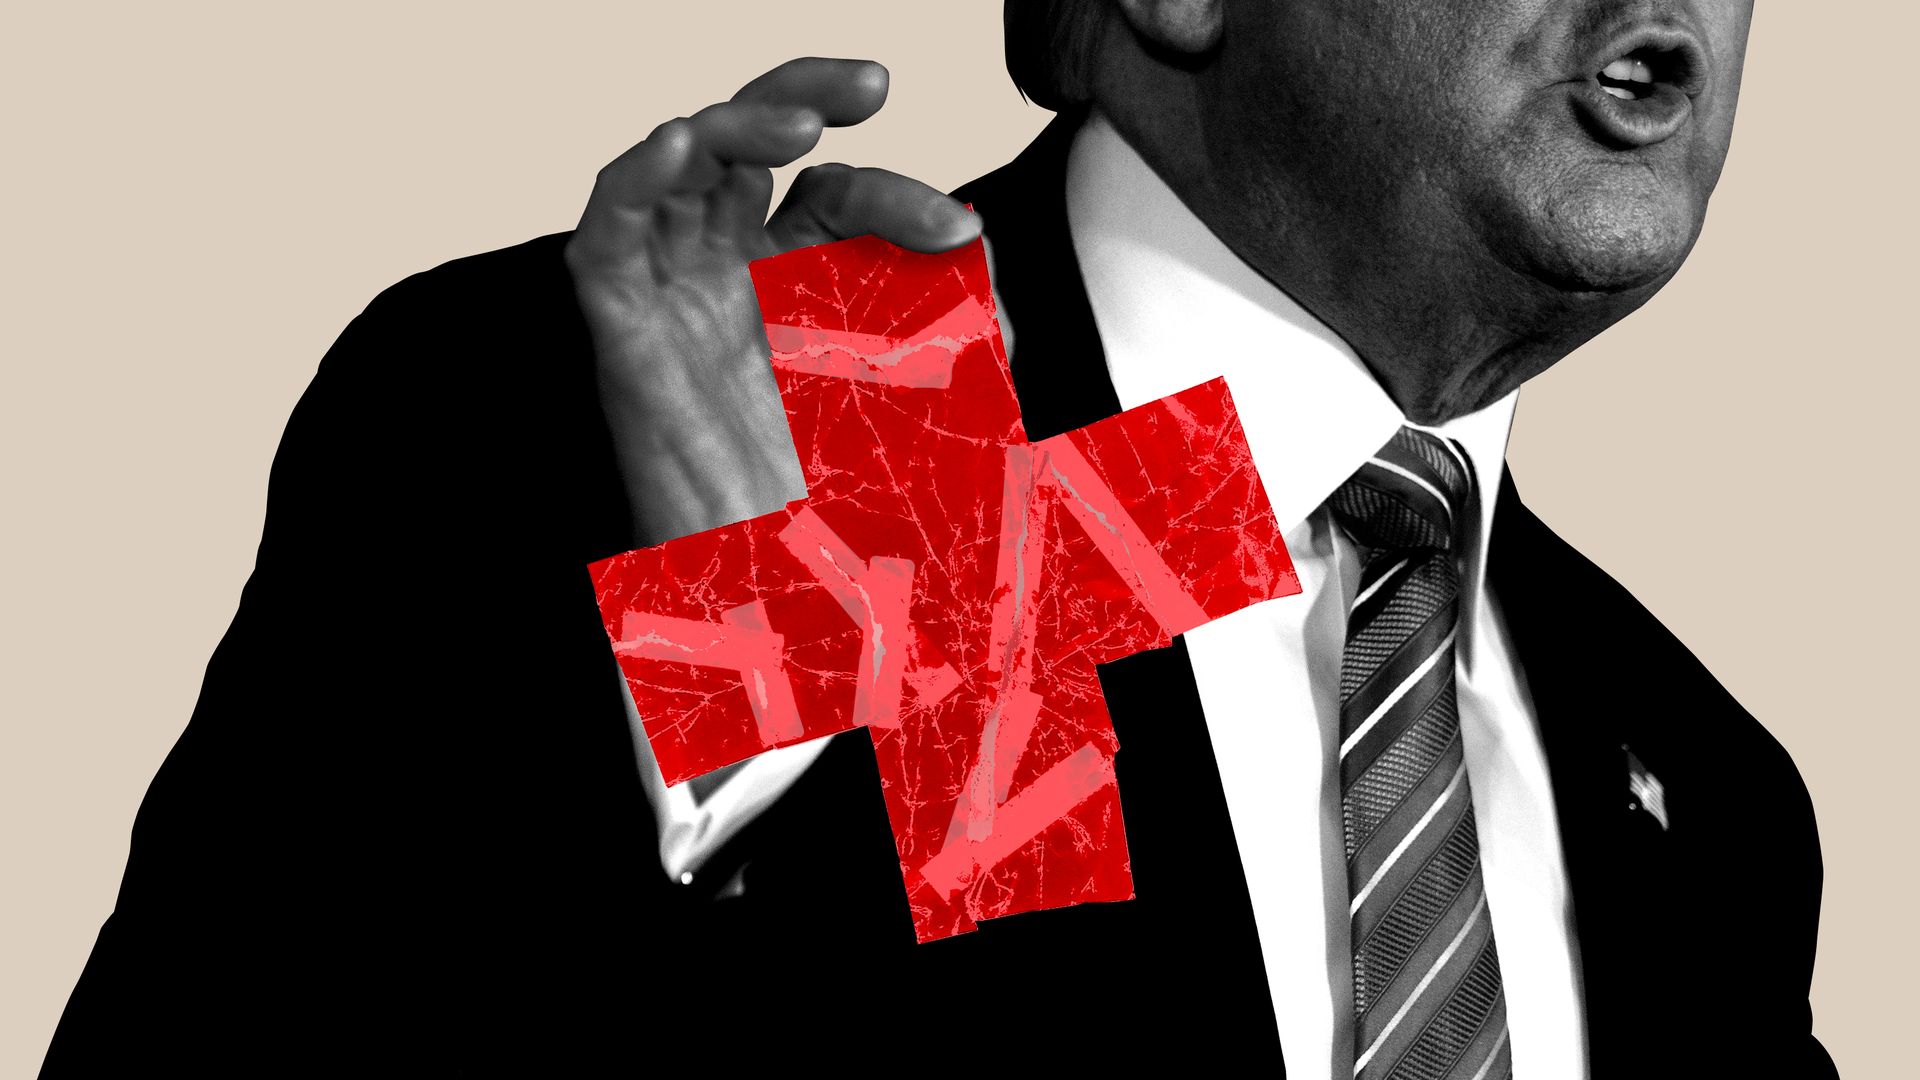 Trump holding a damaged red cross